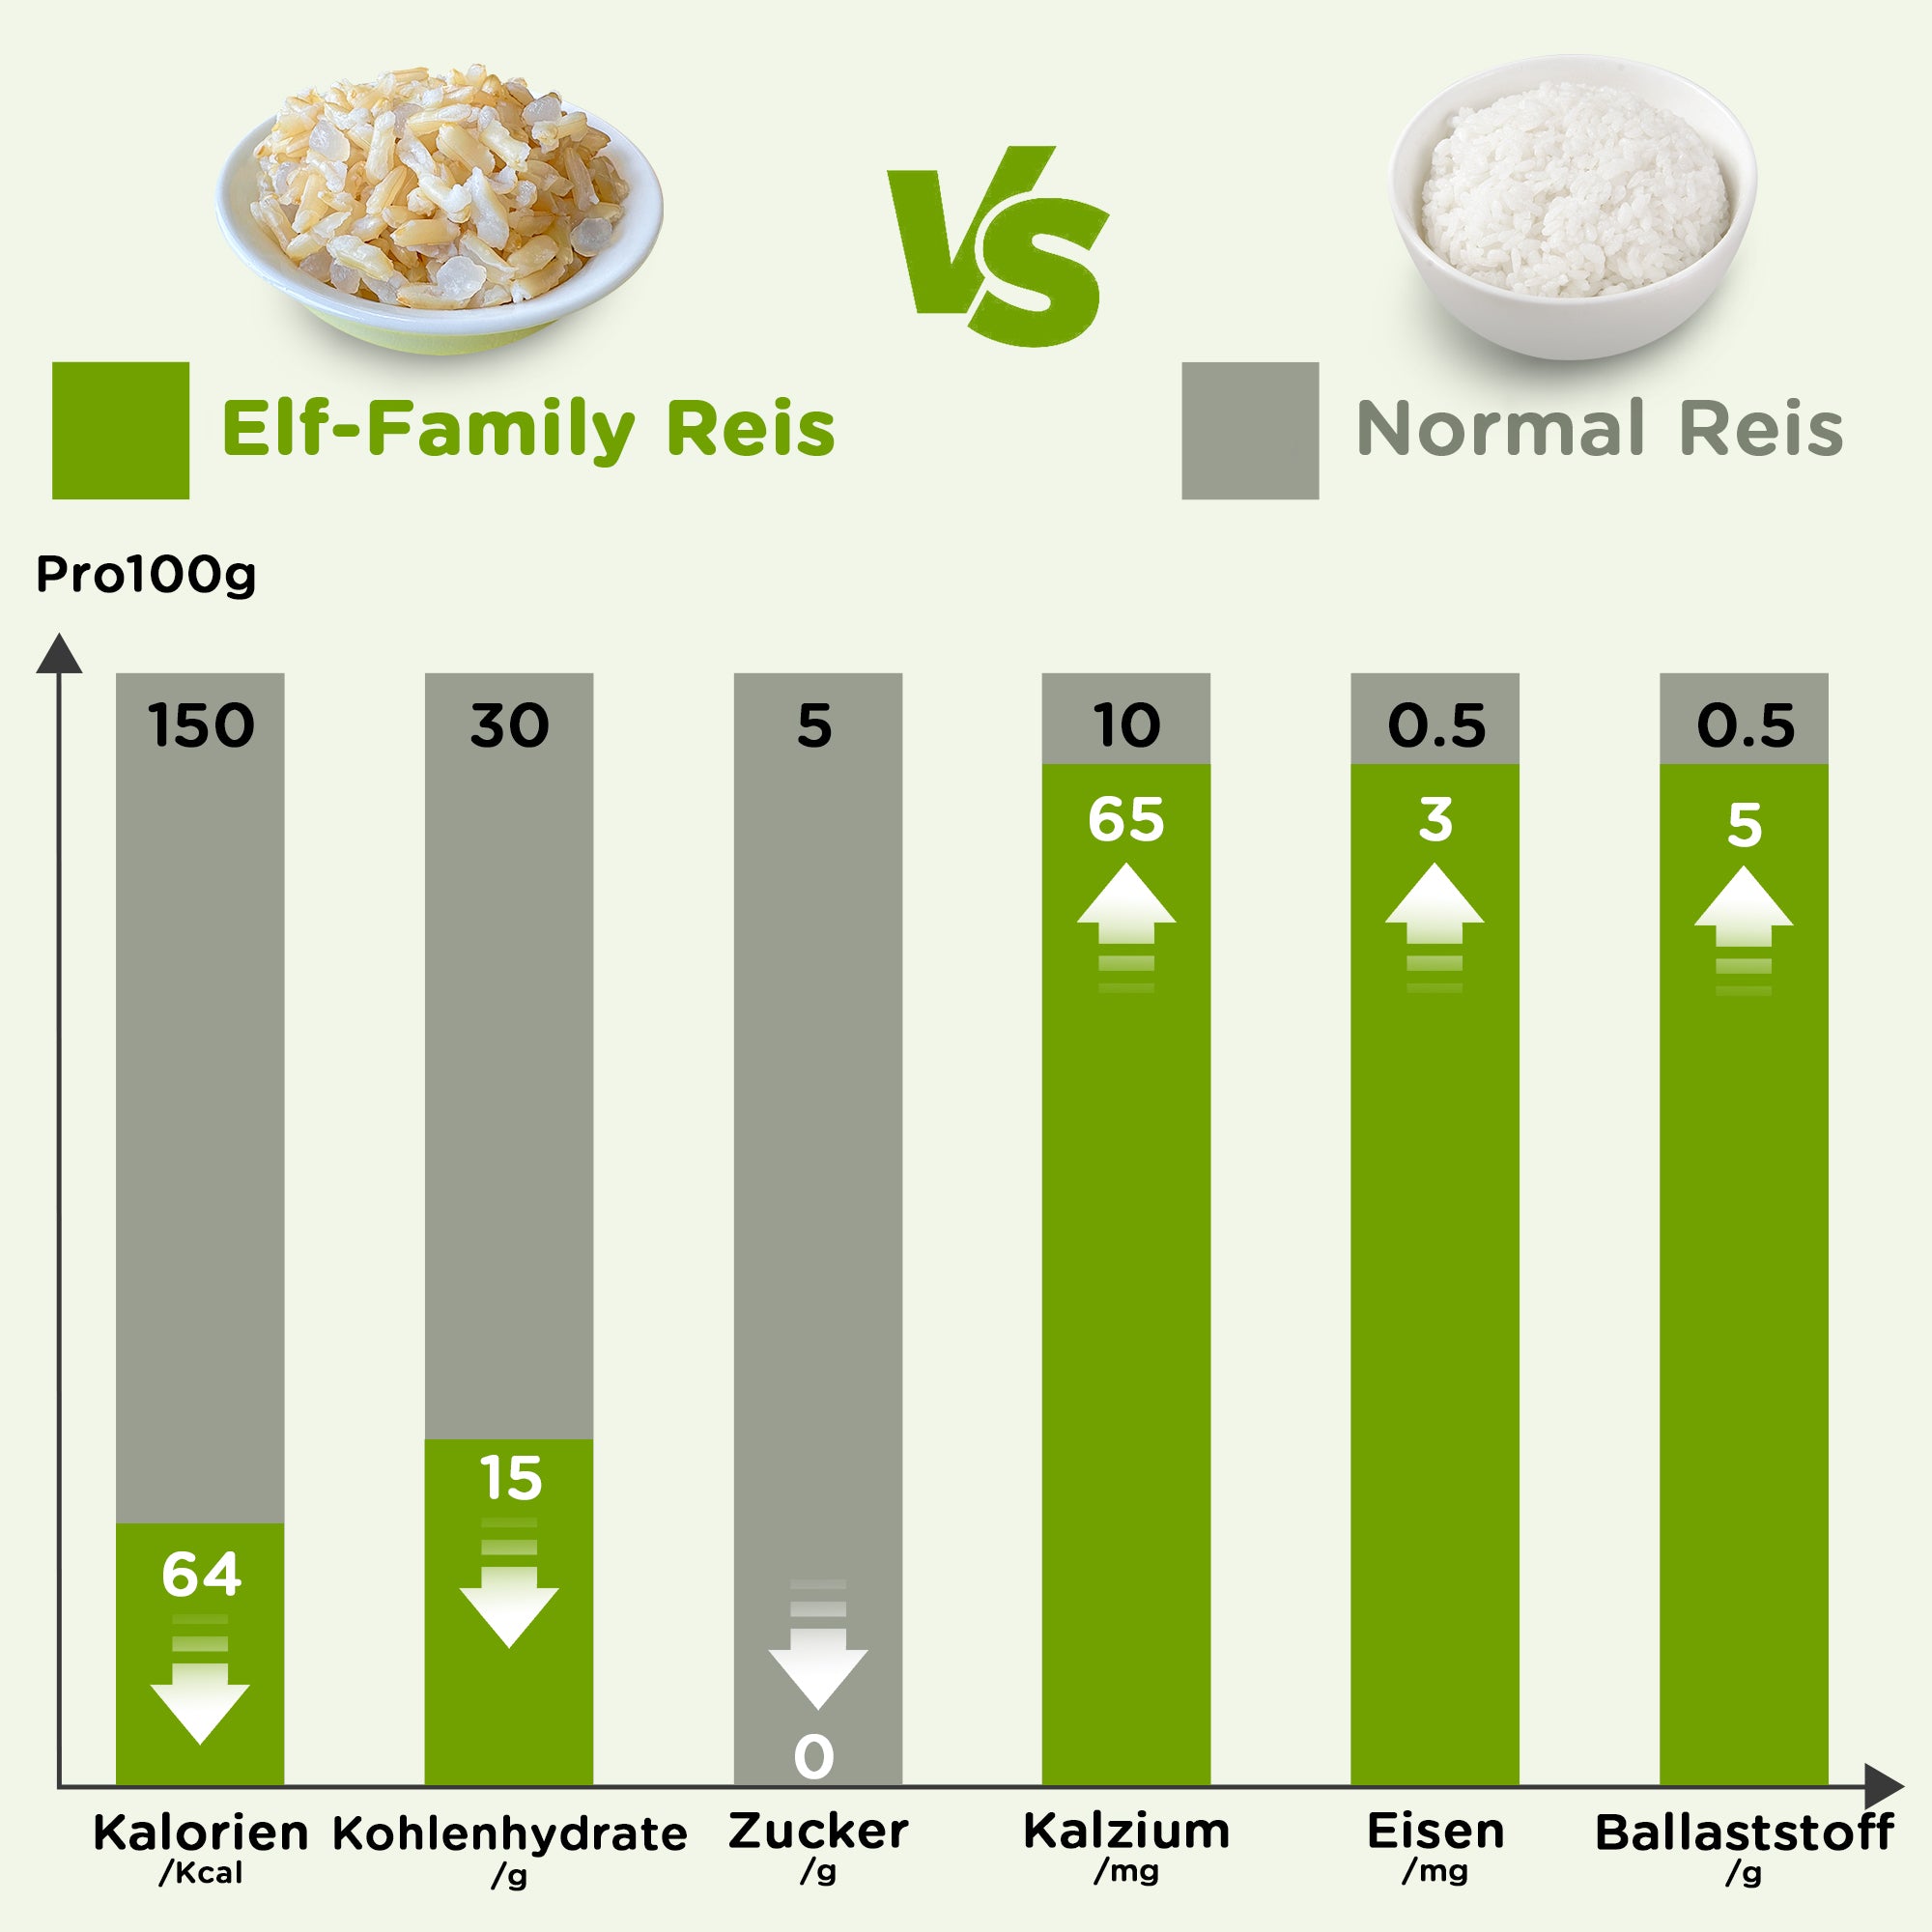 Elf-Family 5+1 diet box Thai jasmine rice Konjac rice - ready meals for microwave in 1 minute - high protein/low calorie/vegan office lunch 